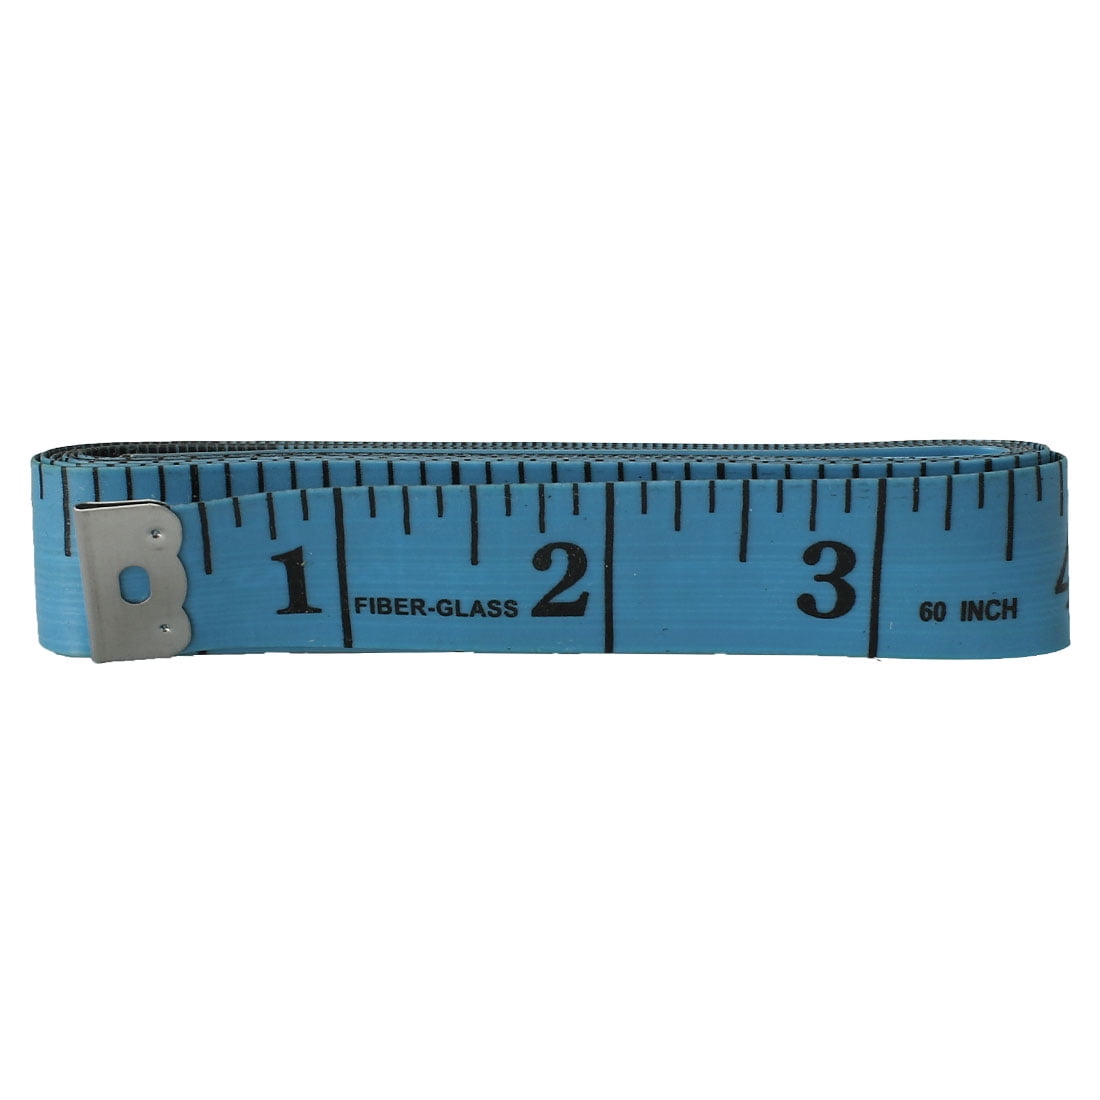 2Pcs Body Waist Measuring Ruler Sewing Cloth Tailor Tape Soft Flat Tool 150cm 